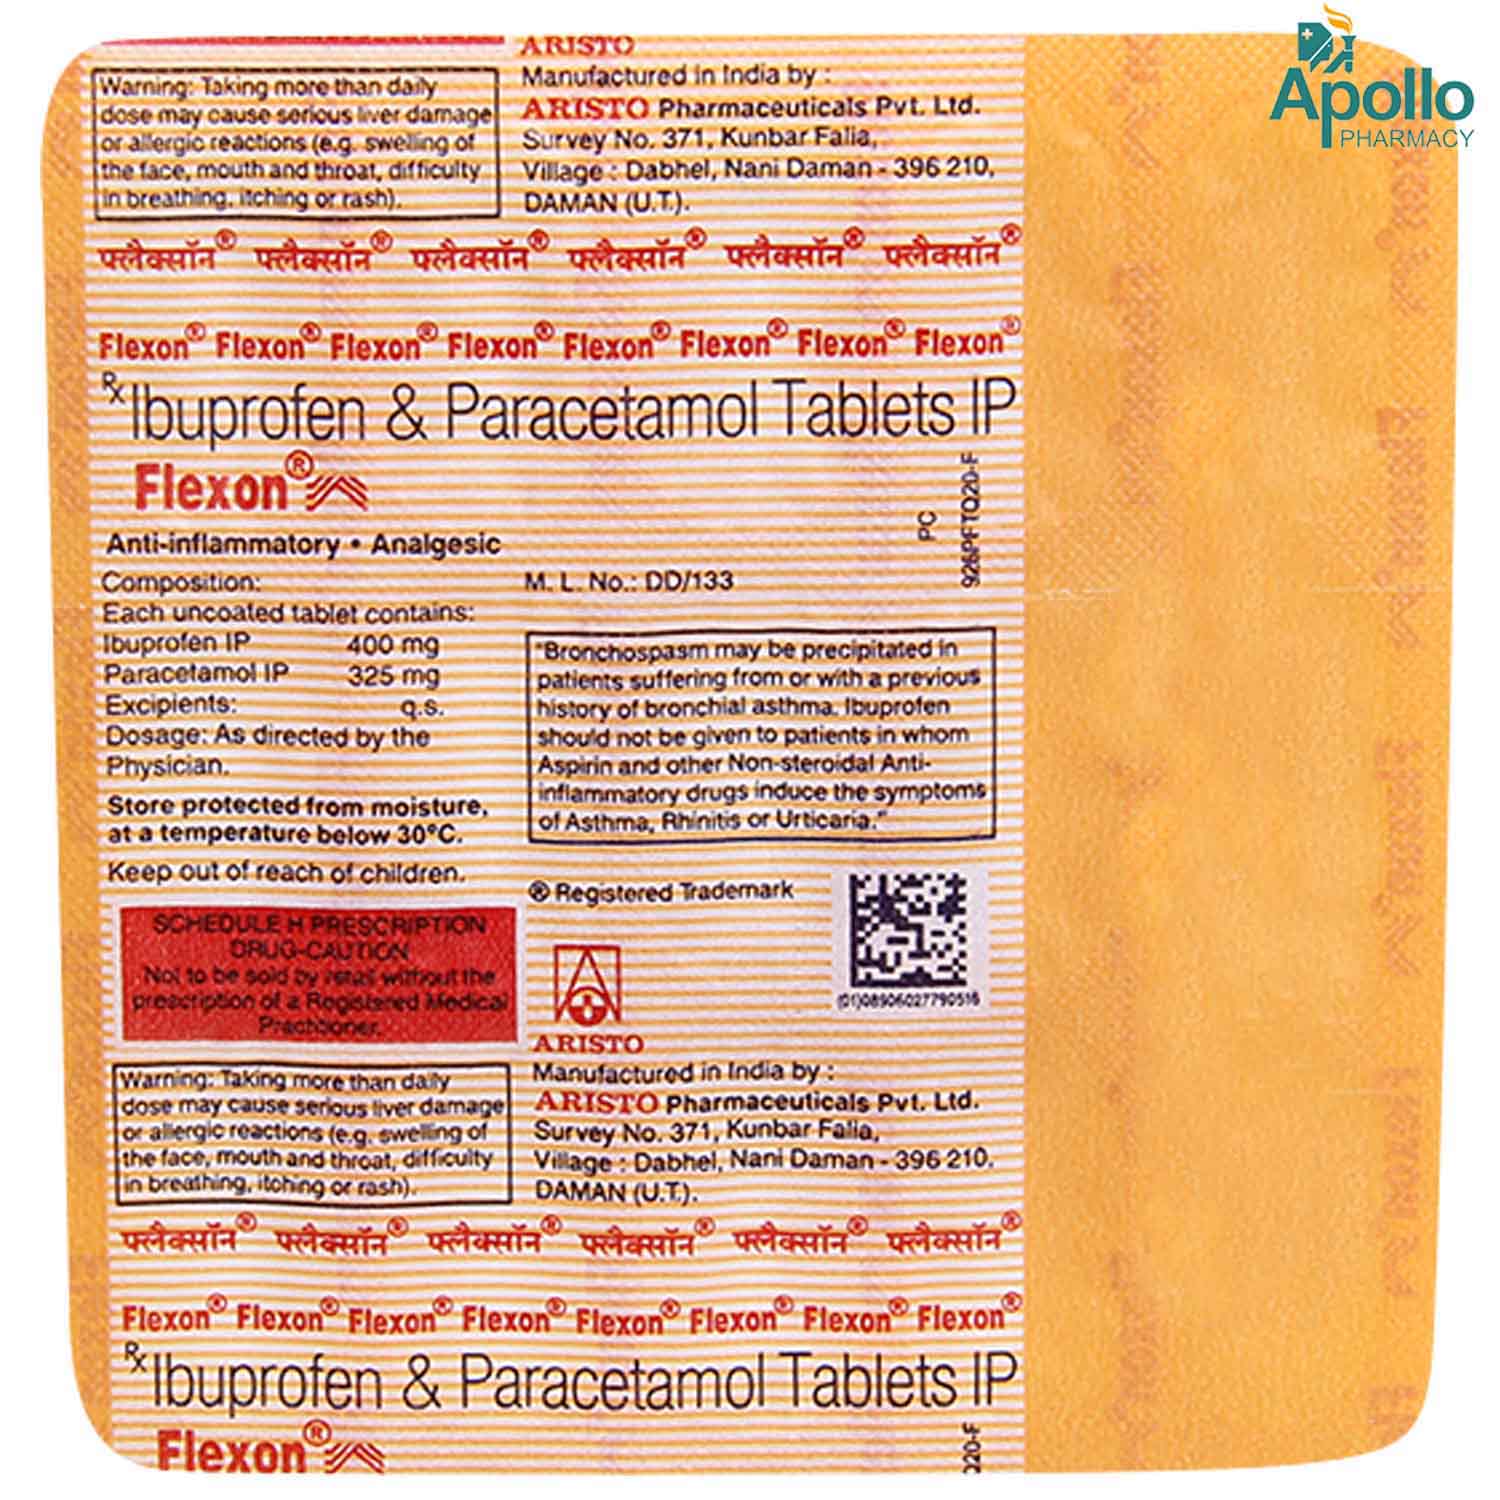 Flexon Tablet S Price Uses Side Effects Composition Apollo Pharmacy